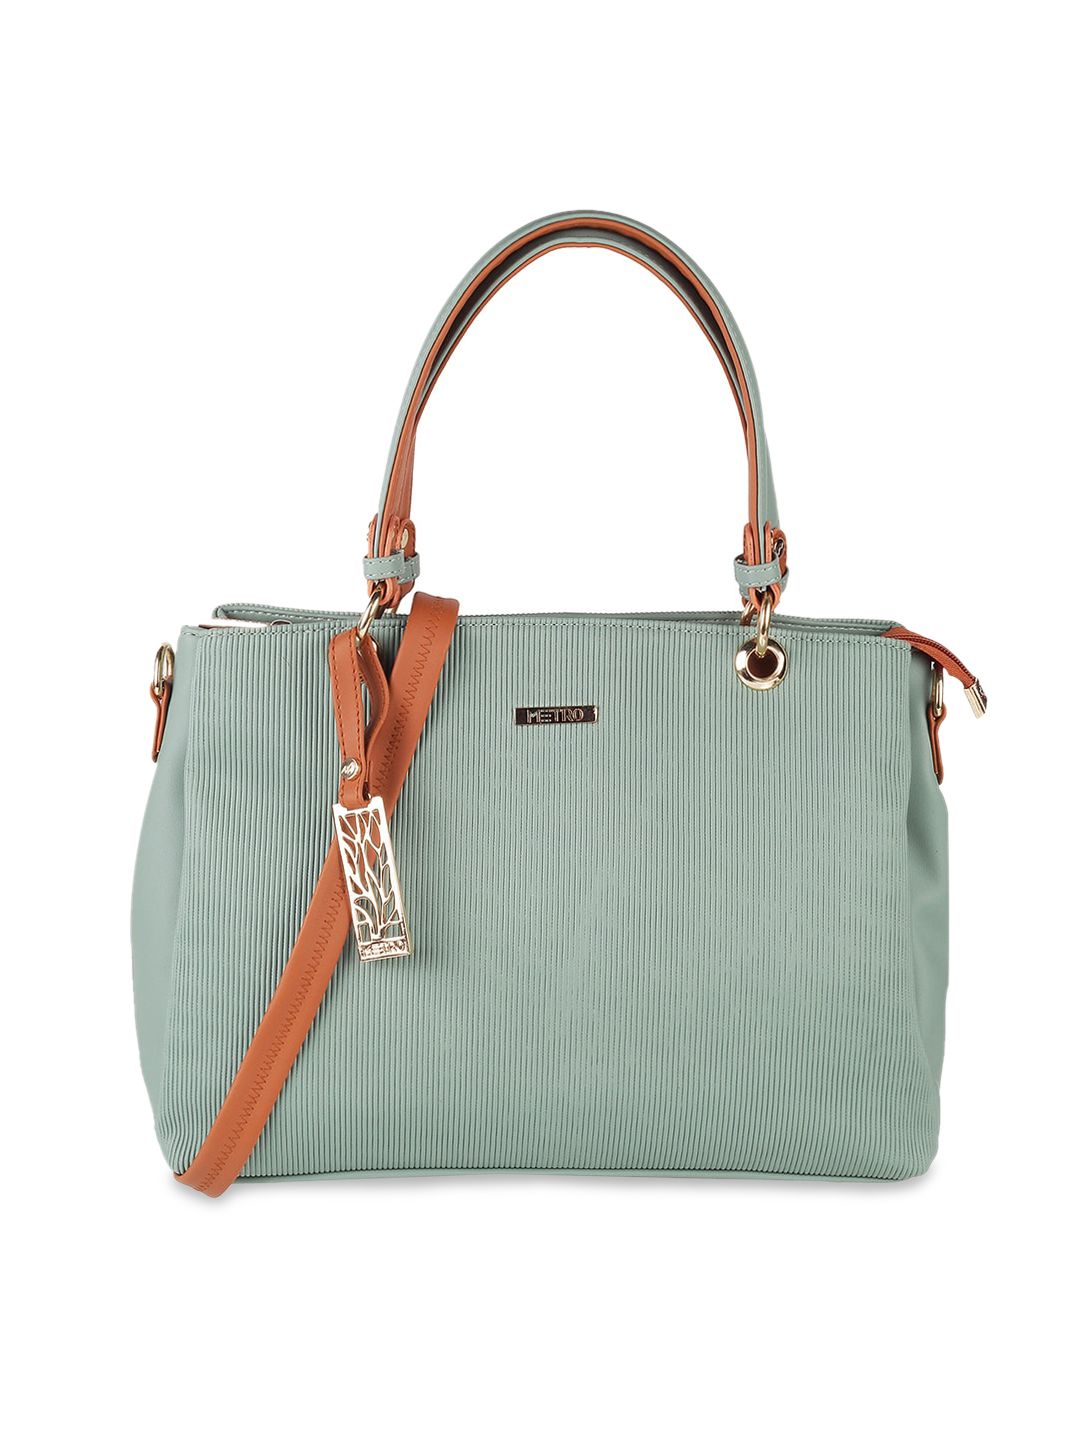 Metro Green PU Structured Handheld Bag with Tasselled Price in India